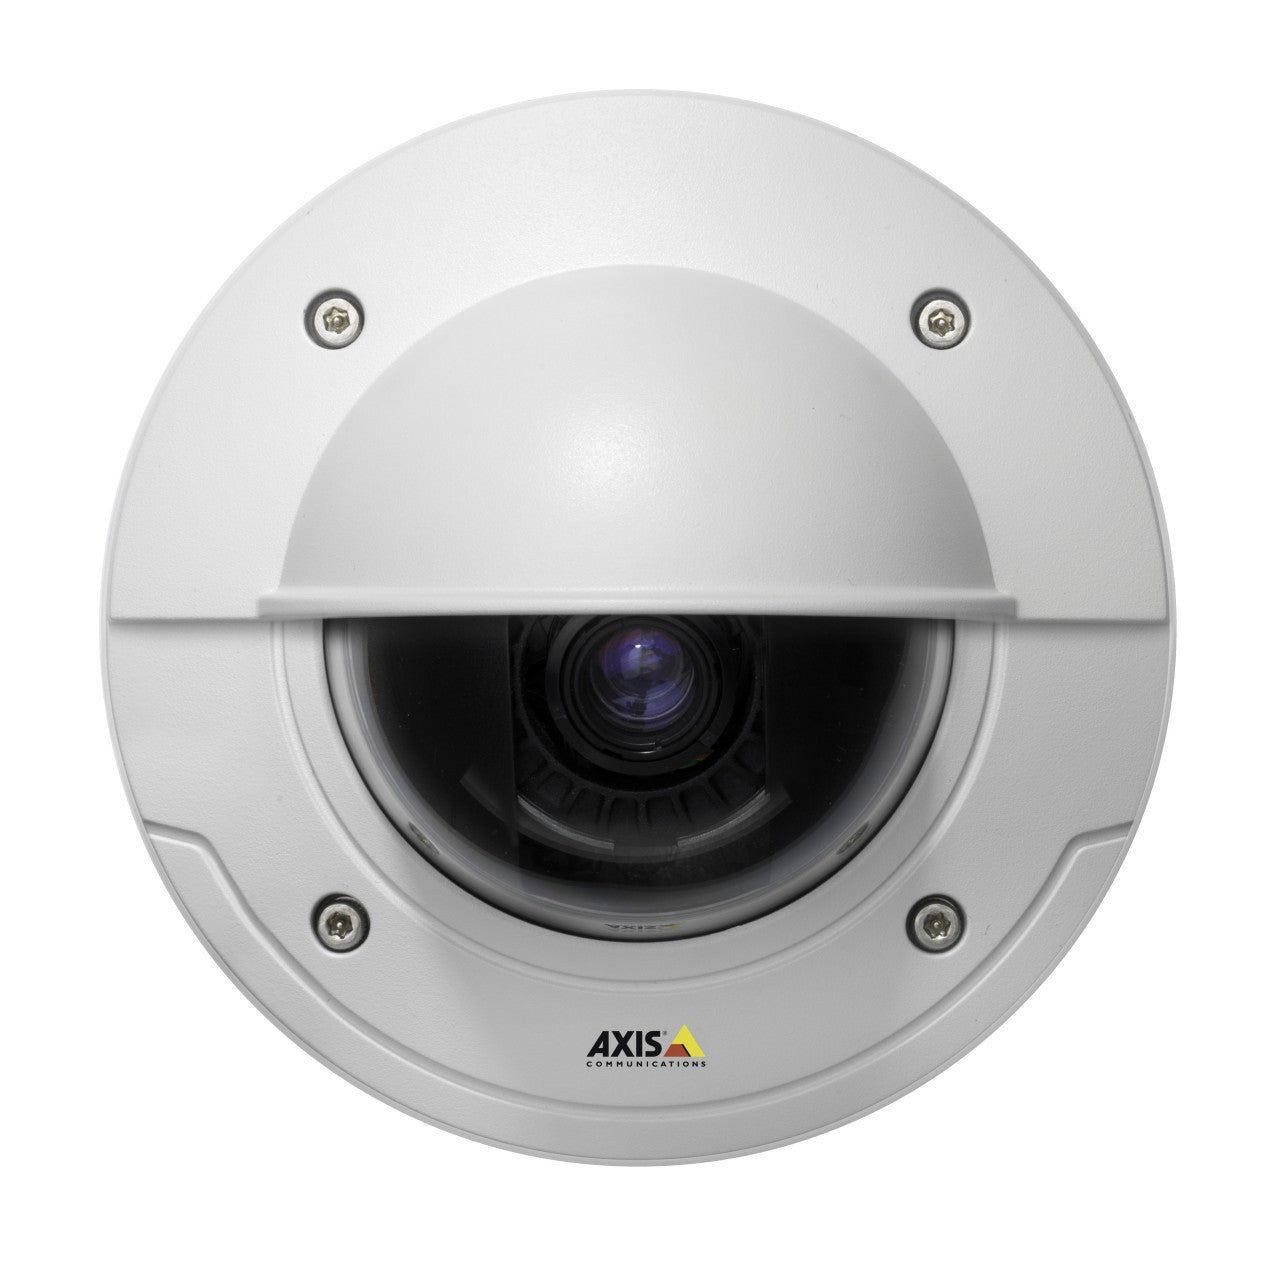 AXIS P3346-VE 1080p Vandal Resistant Fixed Dome Network Camera